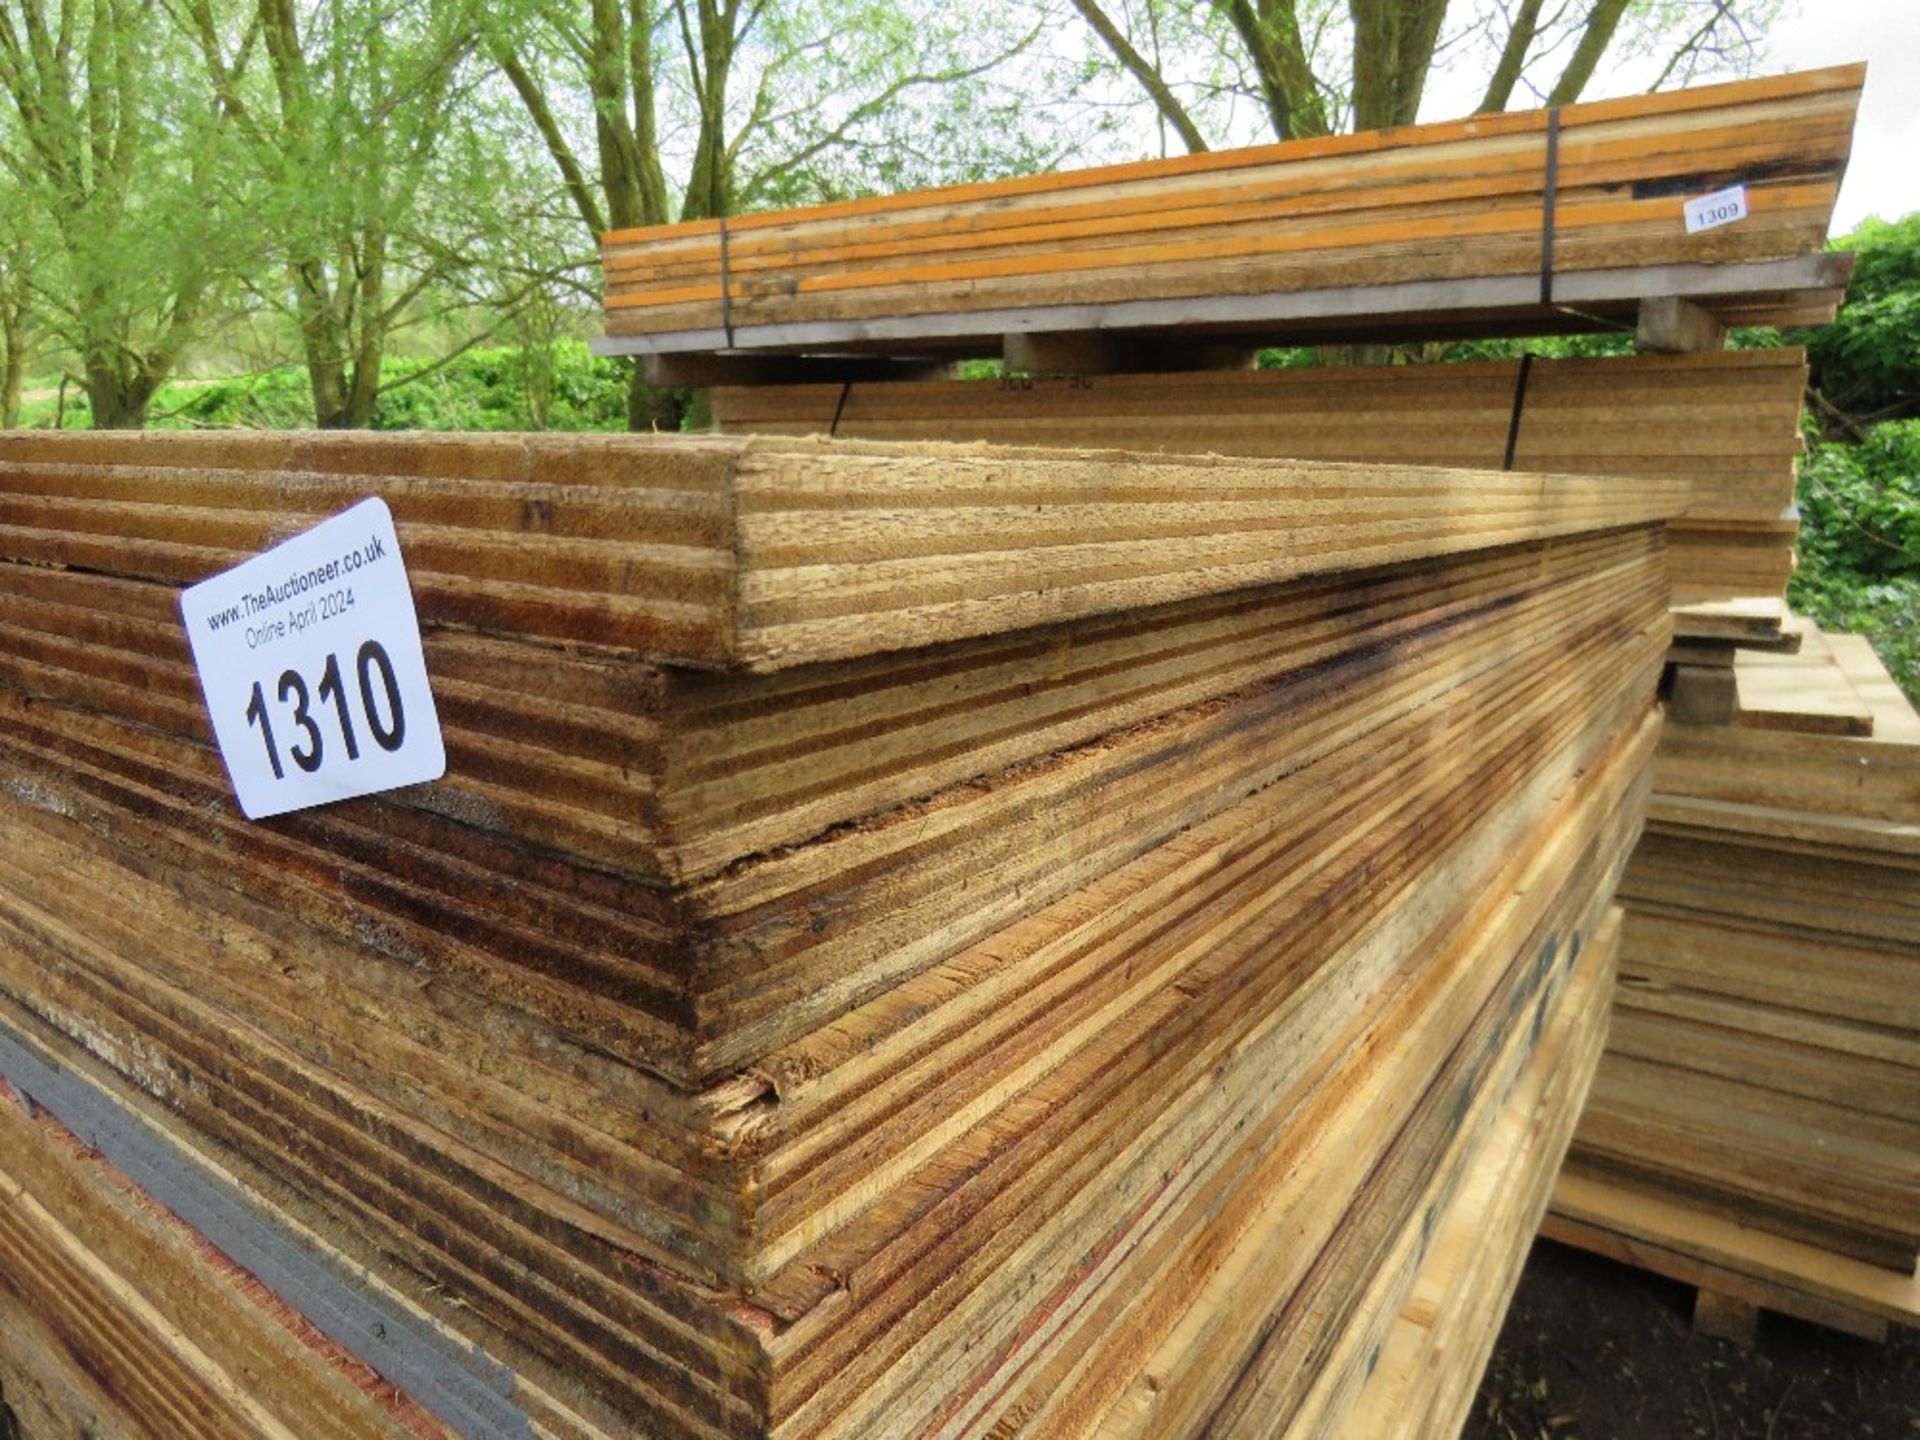 STACK OF APPROXIMATELY 19NO HEAVY DUTY 18-20MM APPROX PLYWOOD SHEETS 1.1M X 2.23M SIZE APPROX. - Image 2 of 4